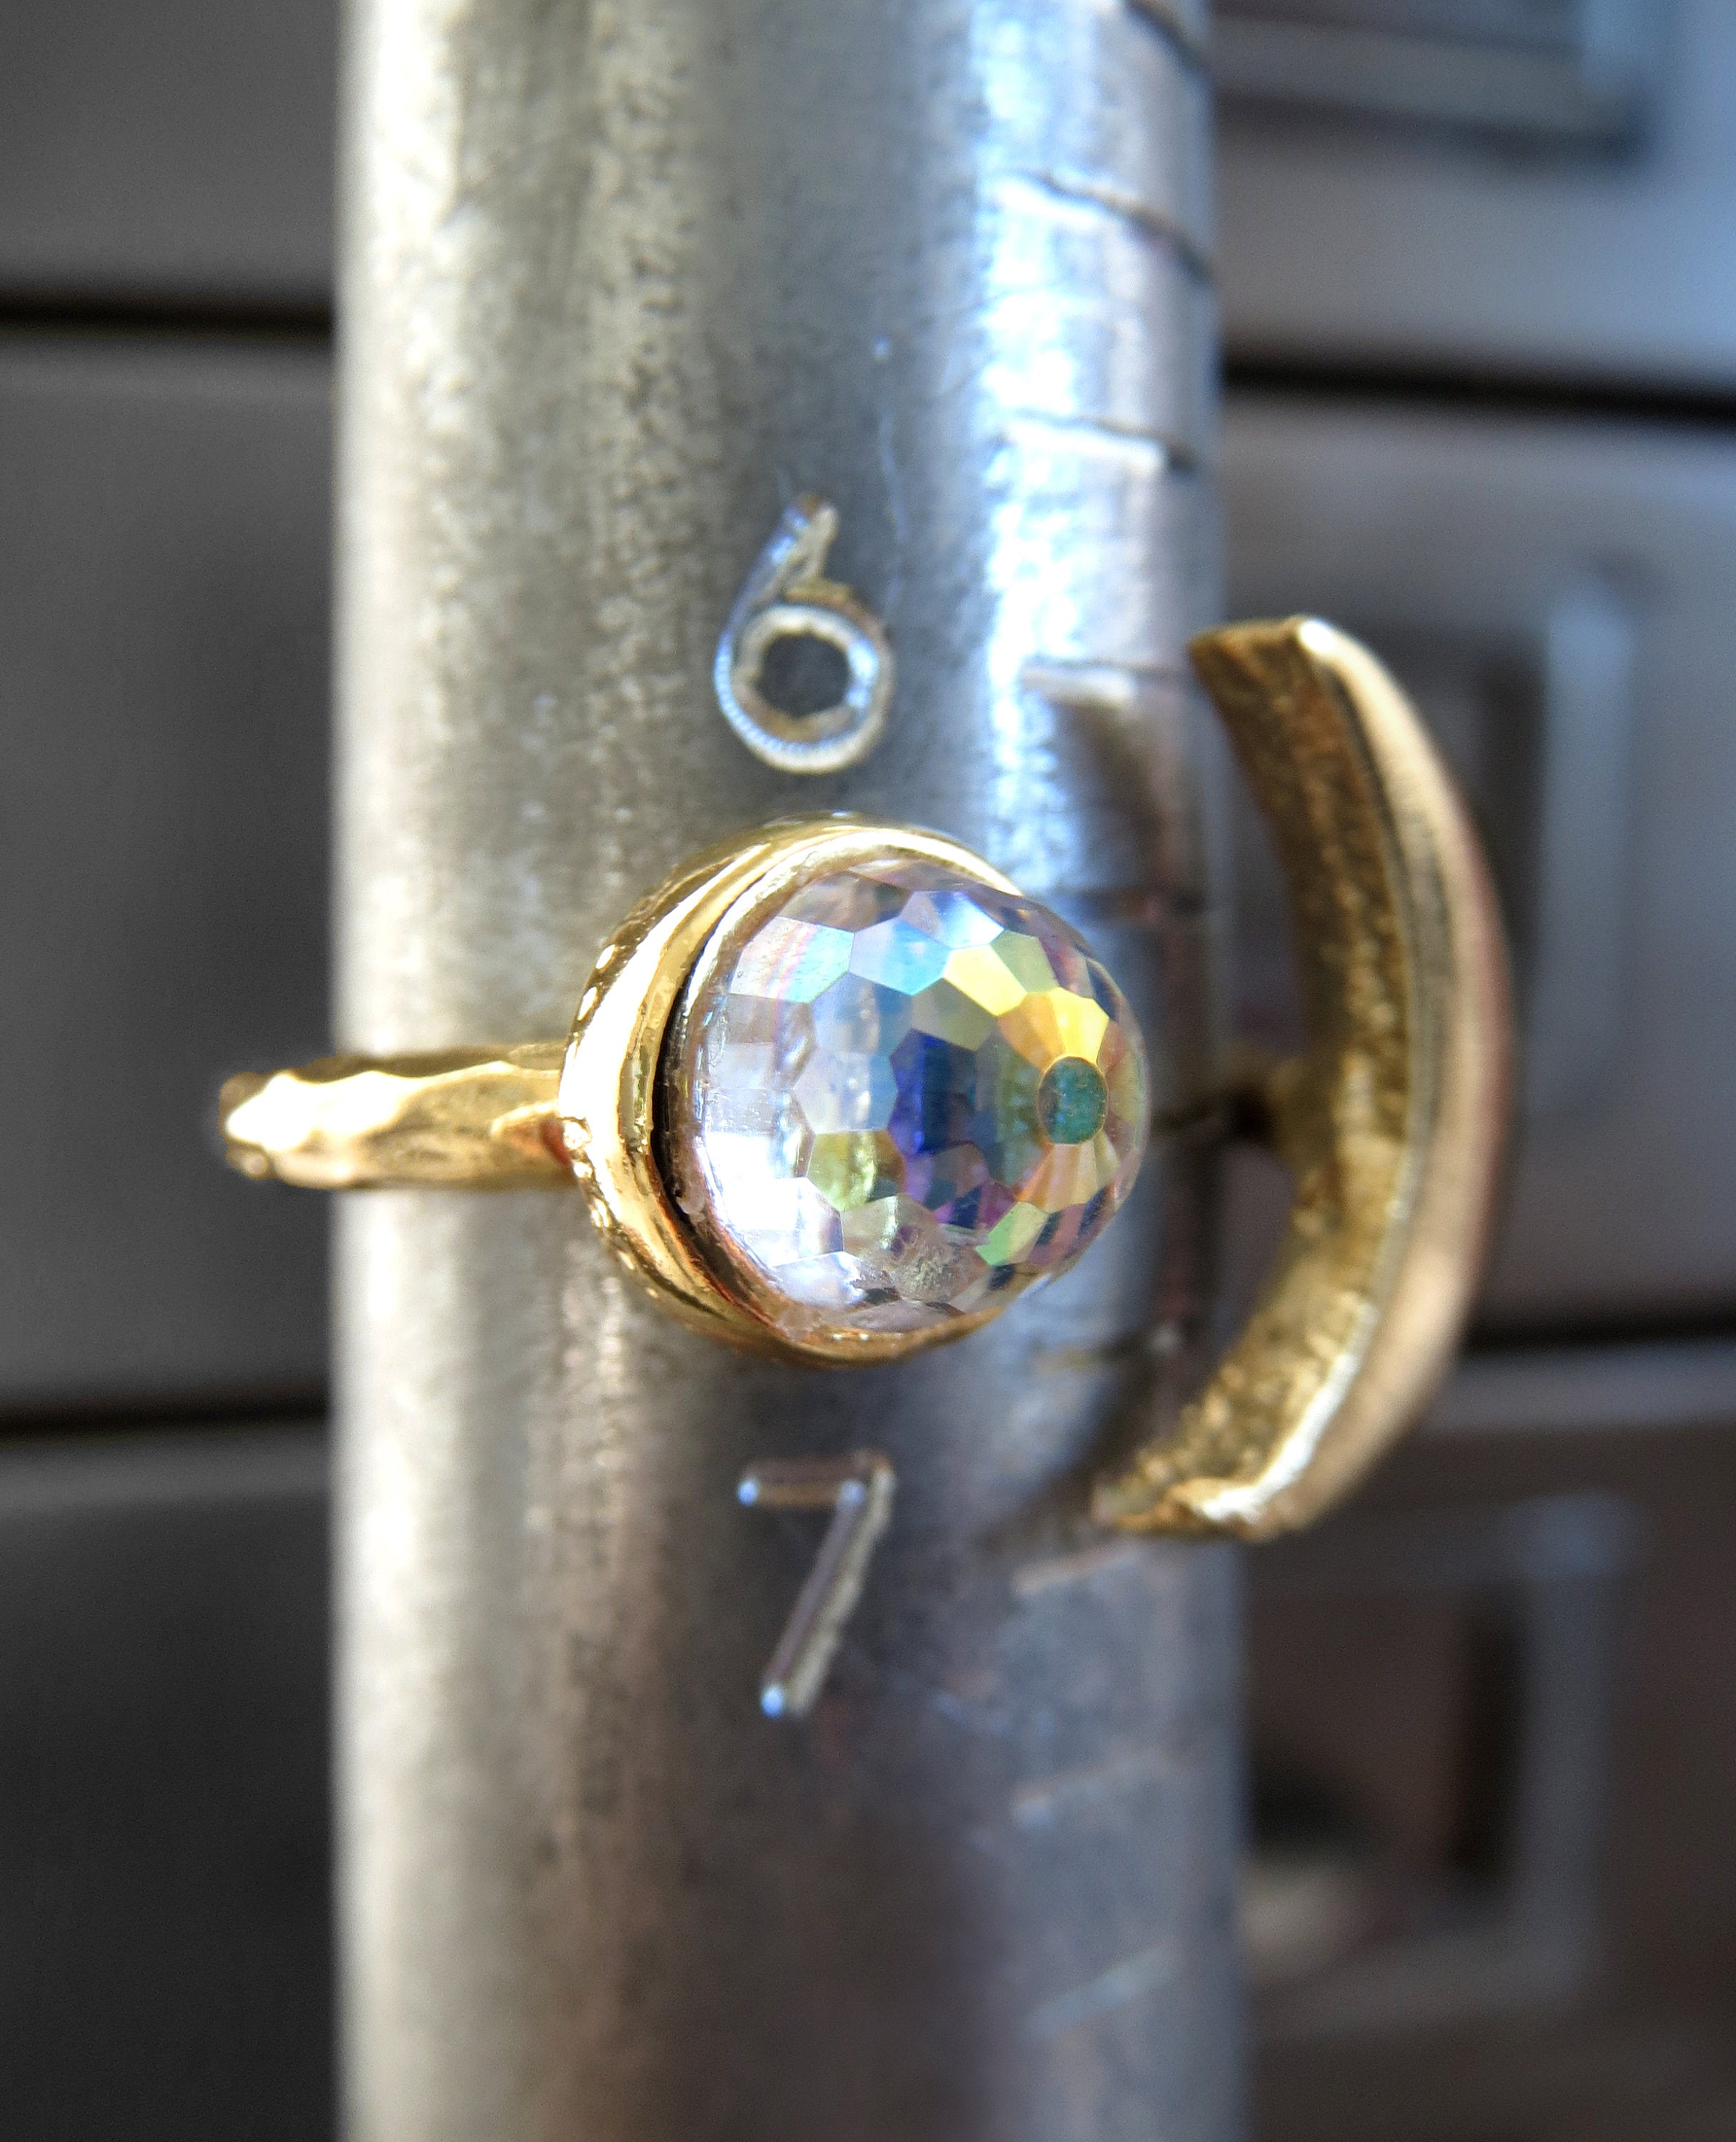 CELESTIAL - Gold Cresent Moon Ring with Vintage Swarovski Crystal with AB Iridescent Finish - Romantic Gift for Teen Girl, Teenager, Women